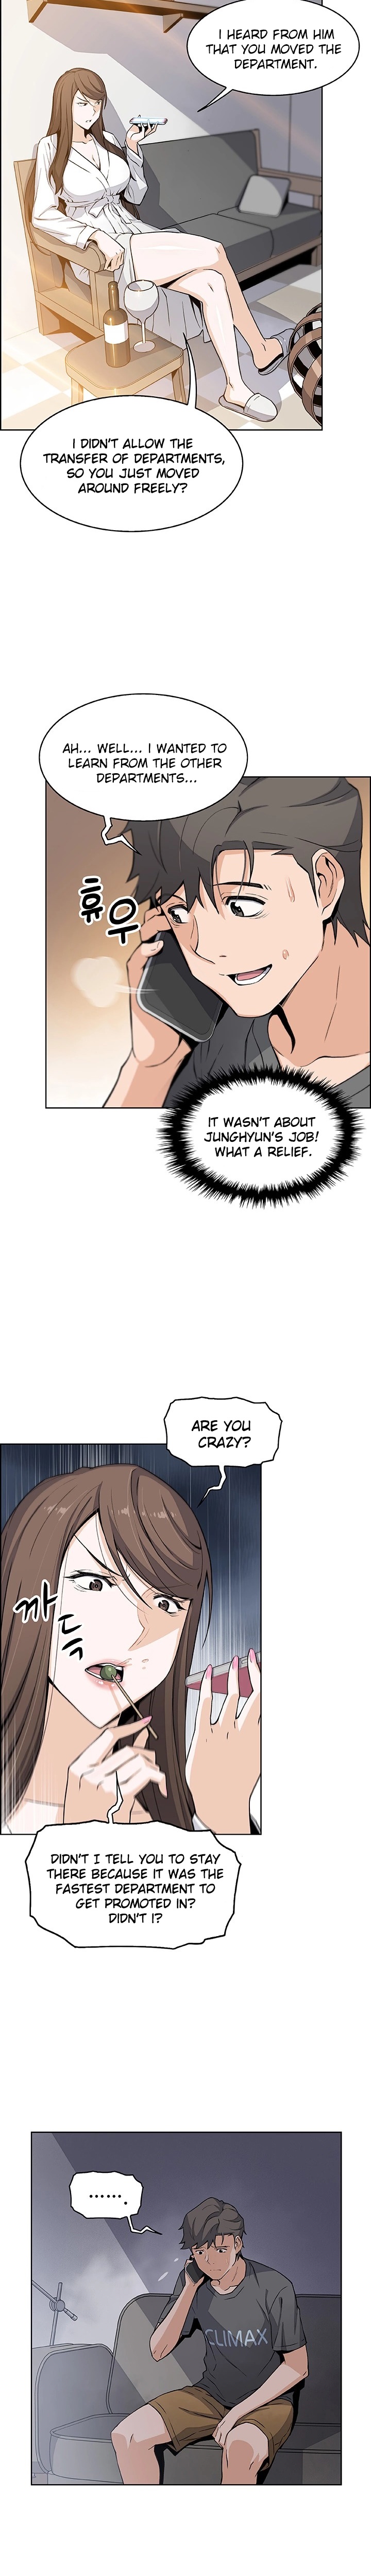 Housekeeper Manhwa - Chapter 28 Page 6